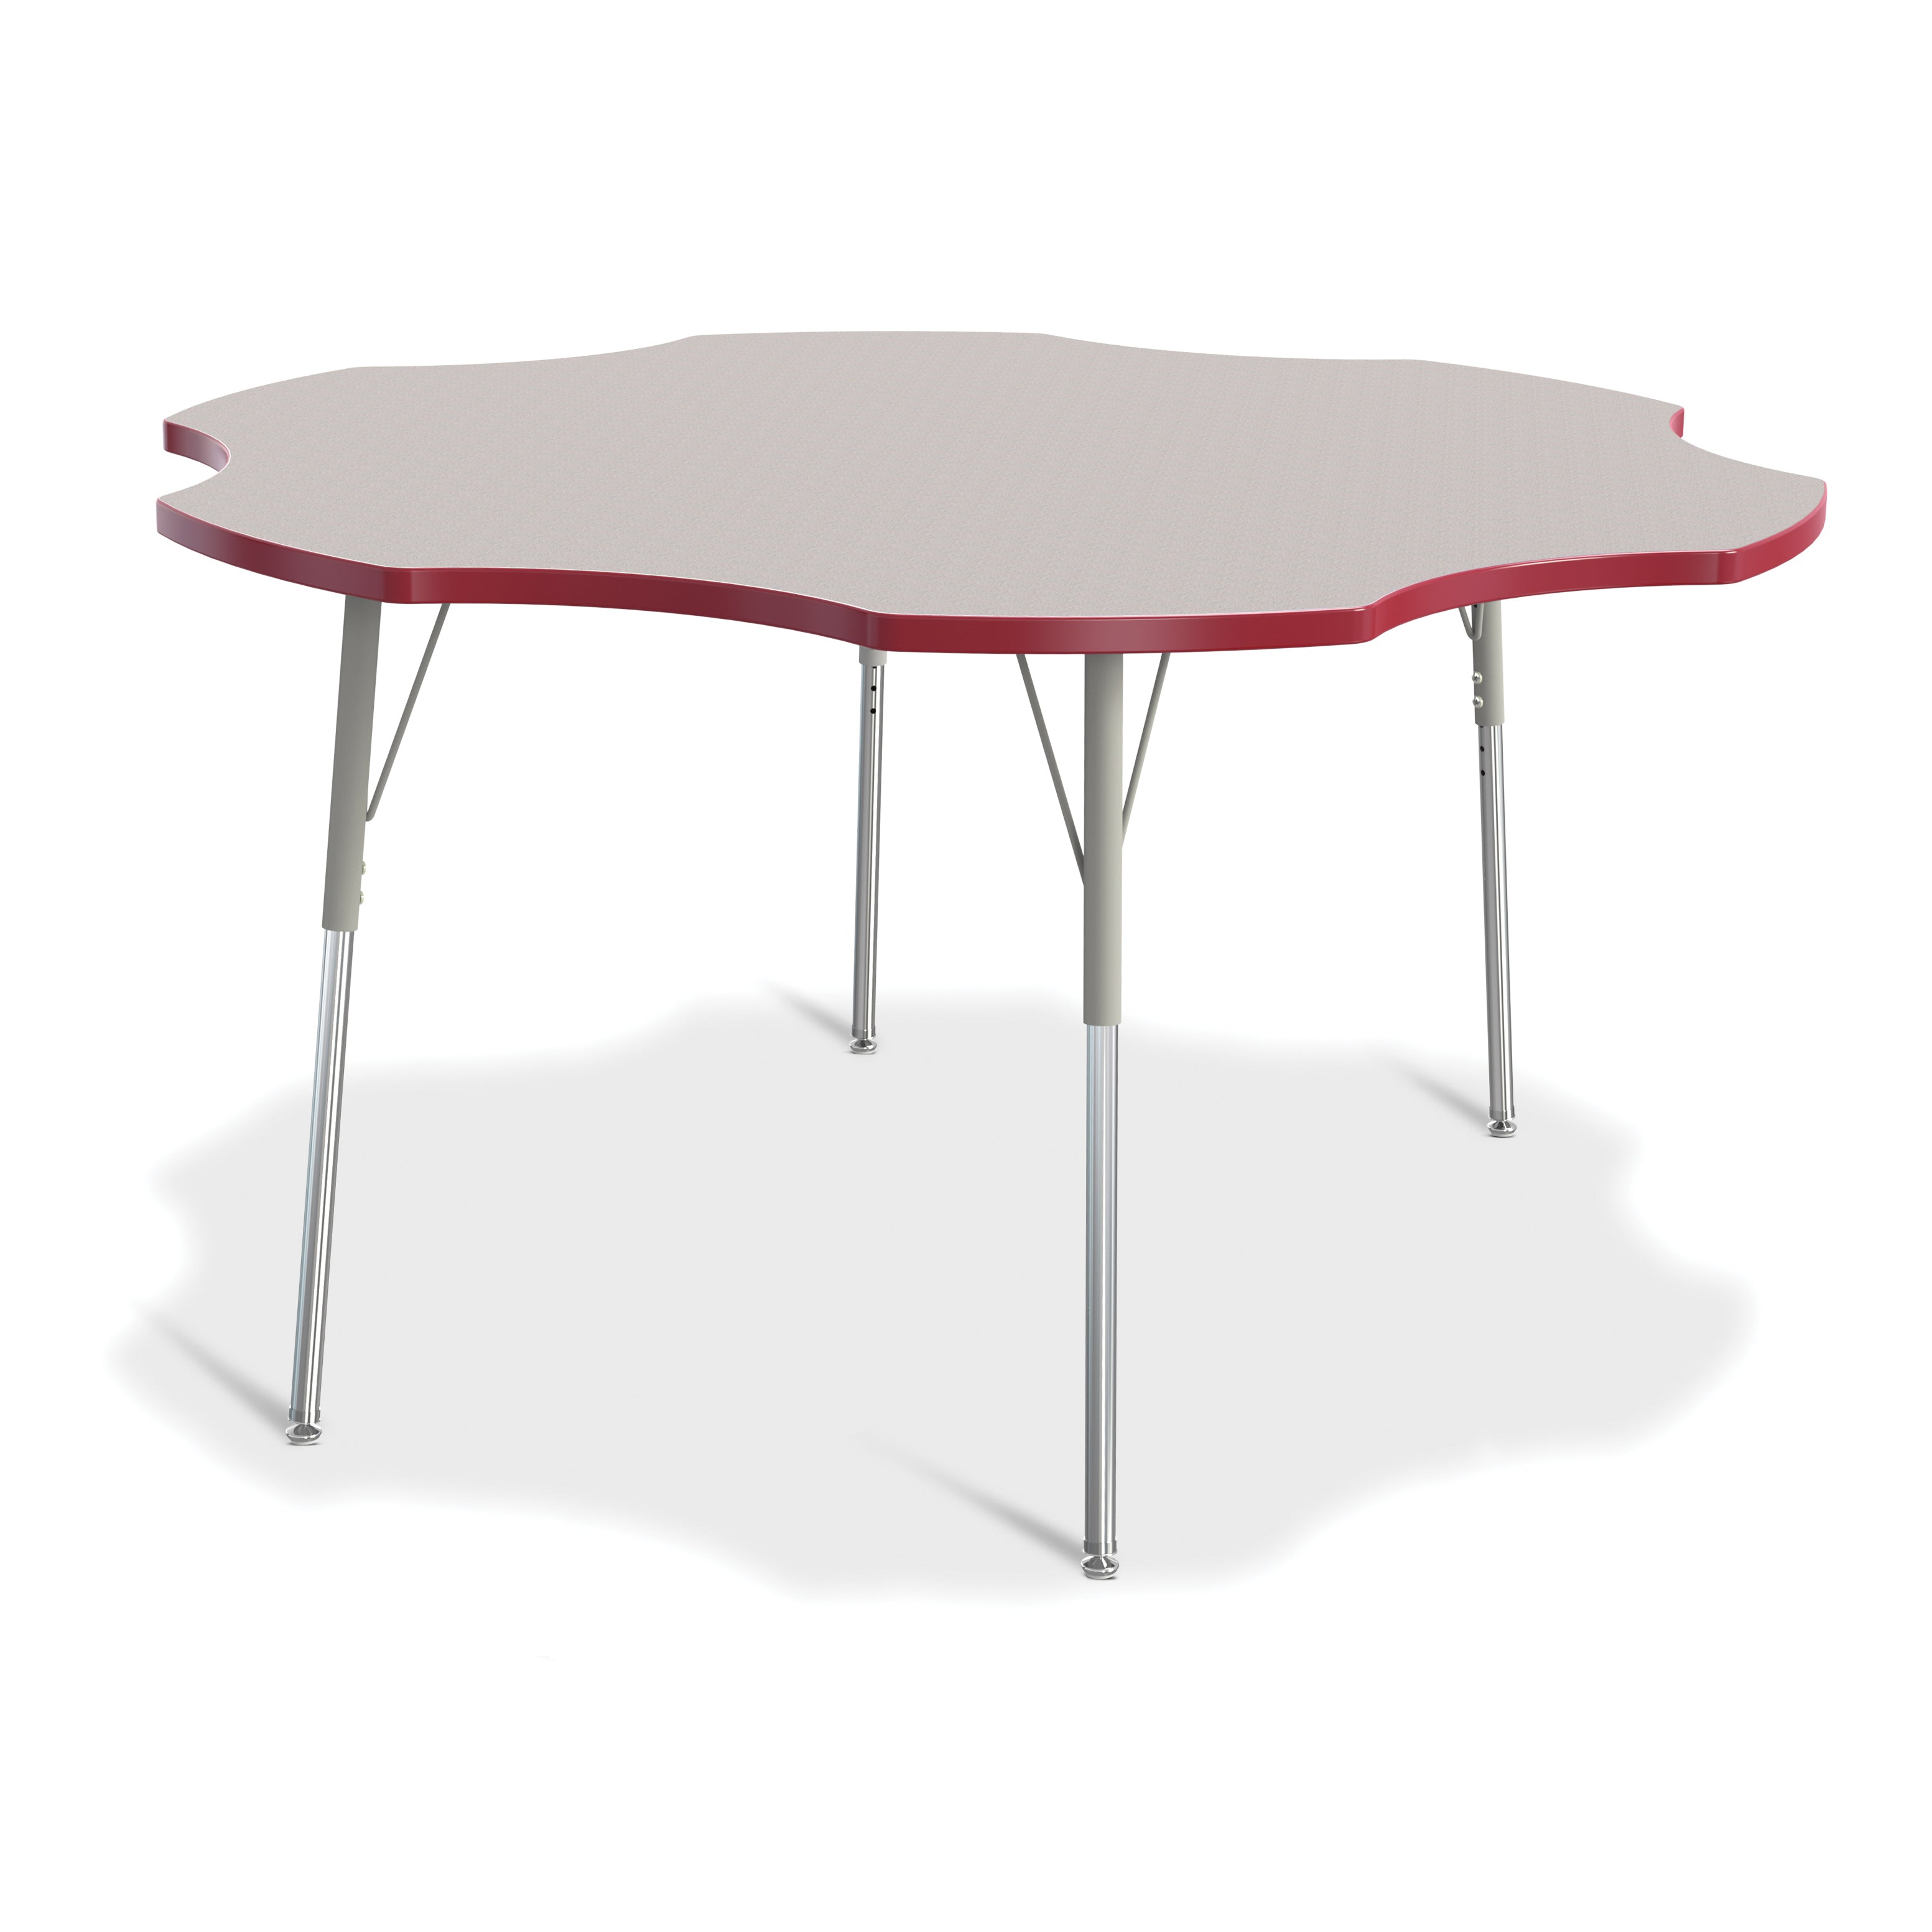 6458JCA008, Berries Six Leaf Activity Table - 60", A-height - Freckled Gray/Red/Gray